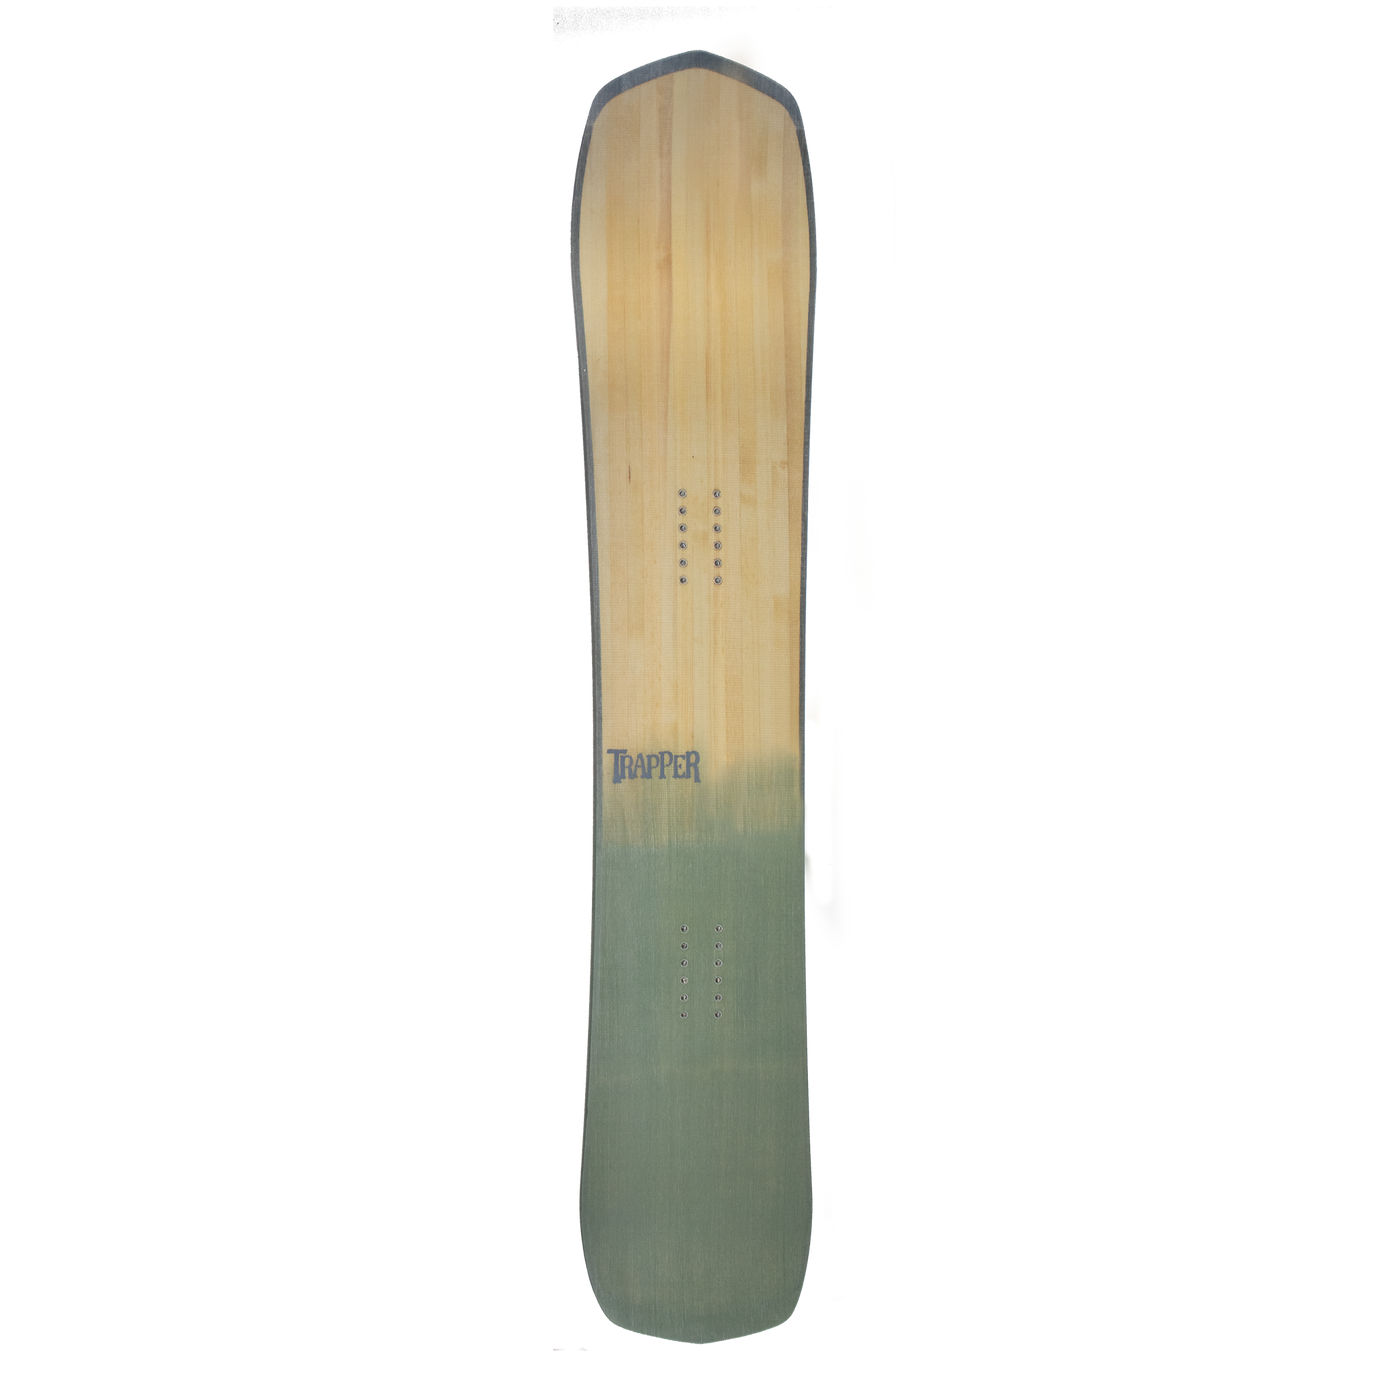 Custom Powder and carving snowboard with Sage green resin tint on wood grain